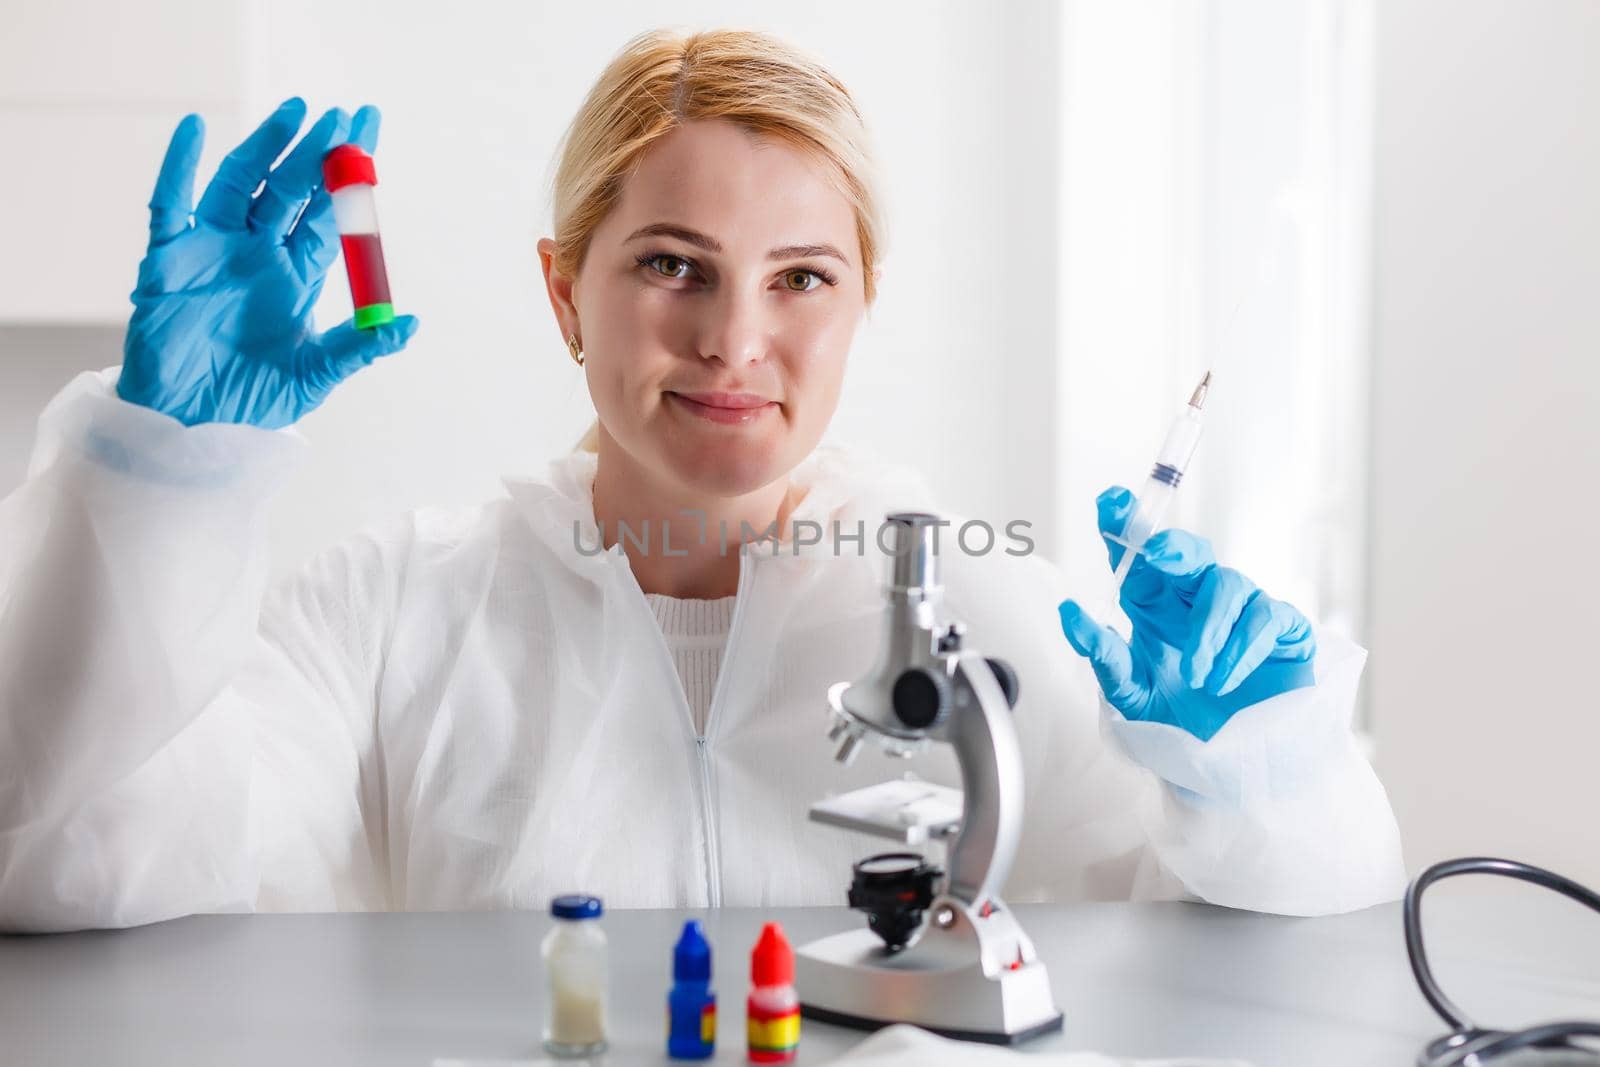 young researcher carrying out scientific research in a lab by Andelov13